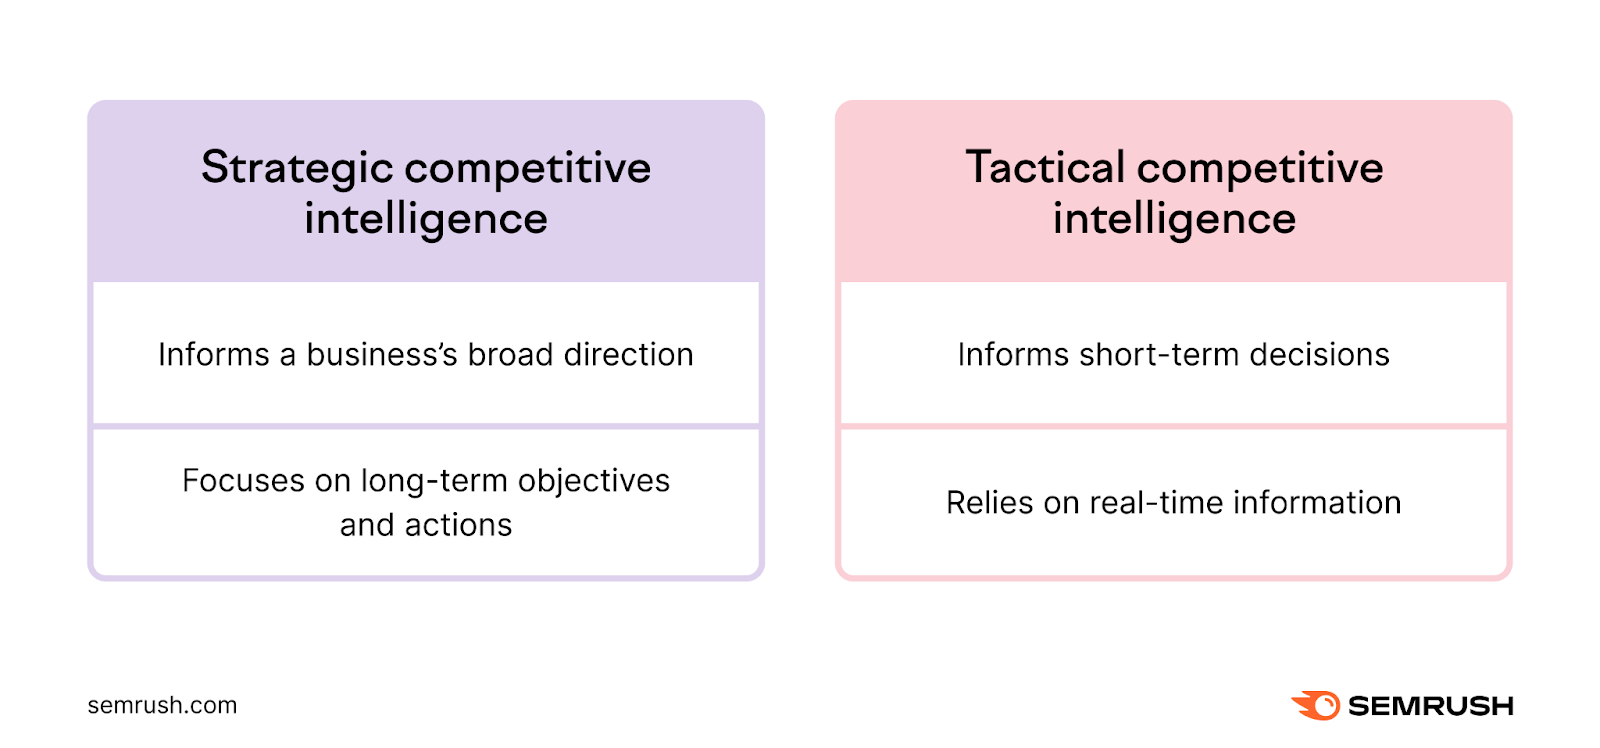 A comparison of strategic and tactical competitive intelligence